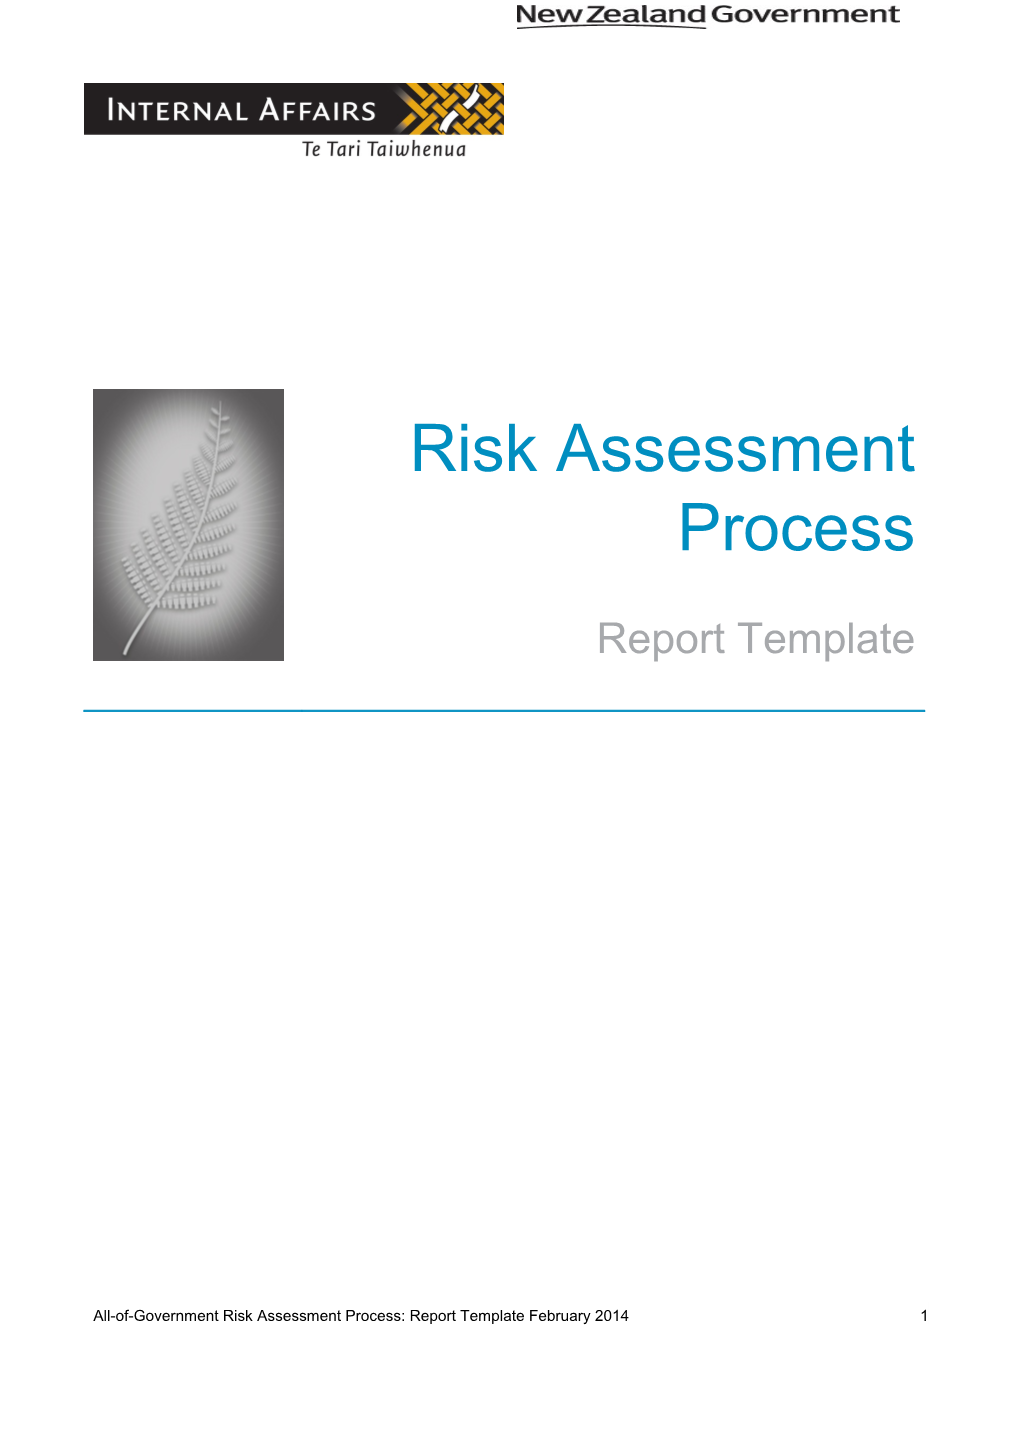 All-Of-Government Risk Assessment Process: Report Template February 2014 3